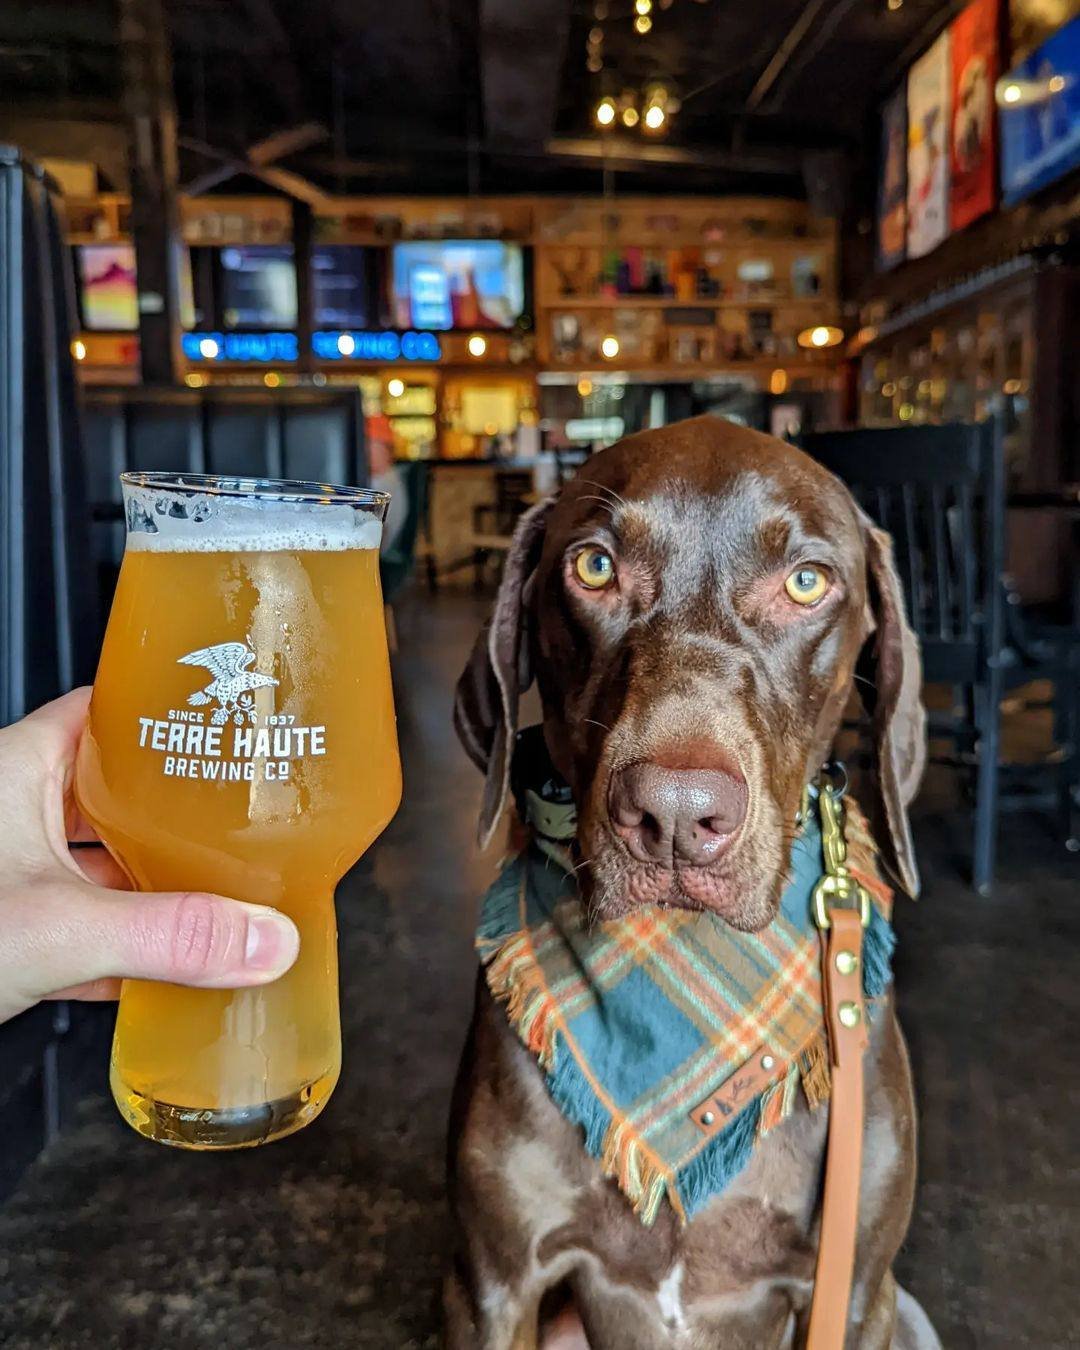 Dogs make the best beer buds 🍺🐾 #NationalPetDay 

Pups are always welcome at @honeysatthbc! 

#THBC #terrehautebrewingco #craftbeer #taproom #dogs #dogsofinstagram